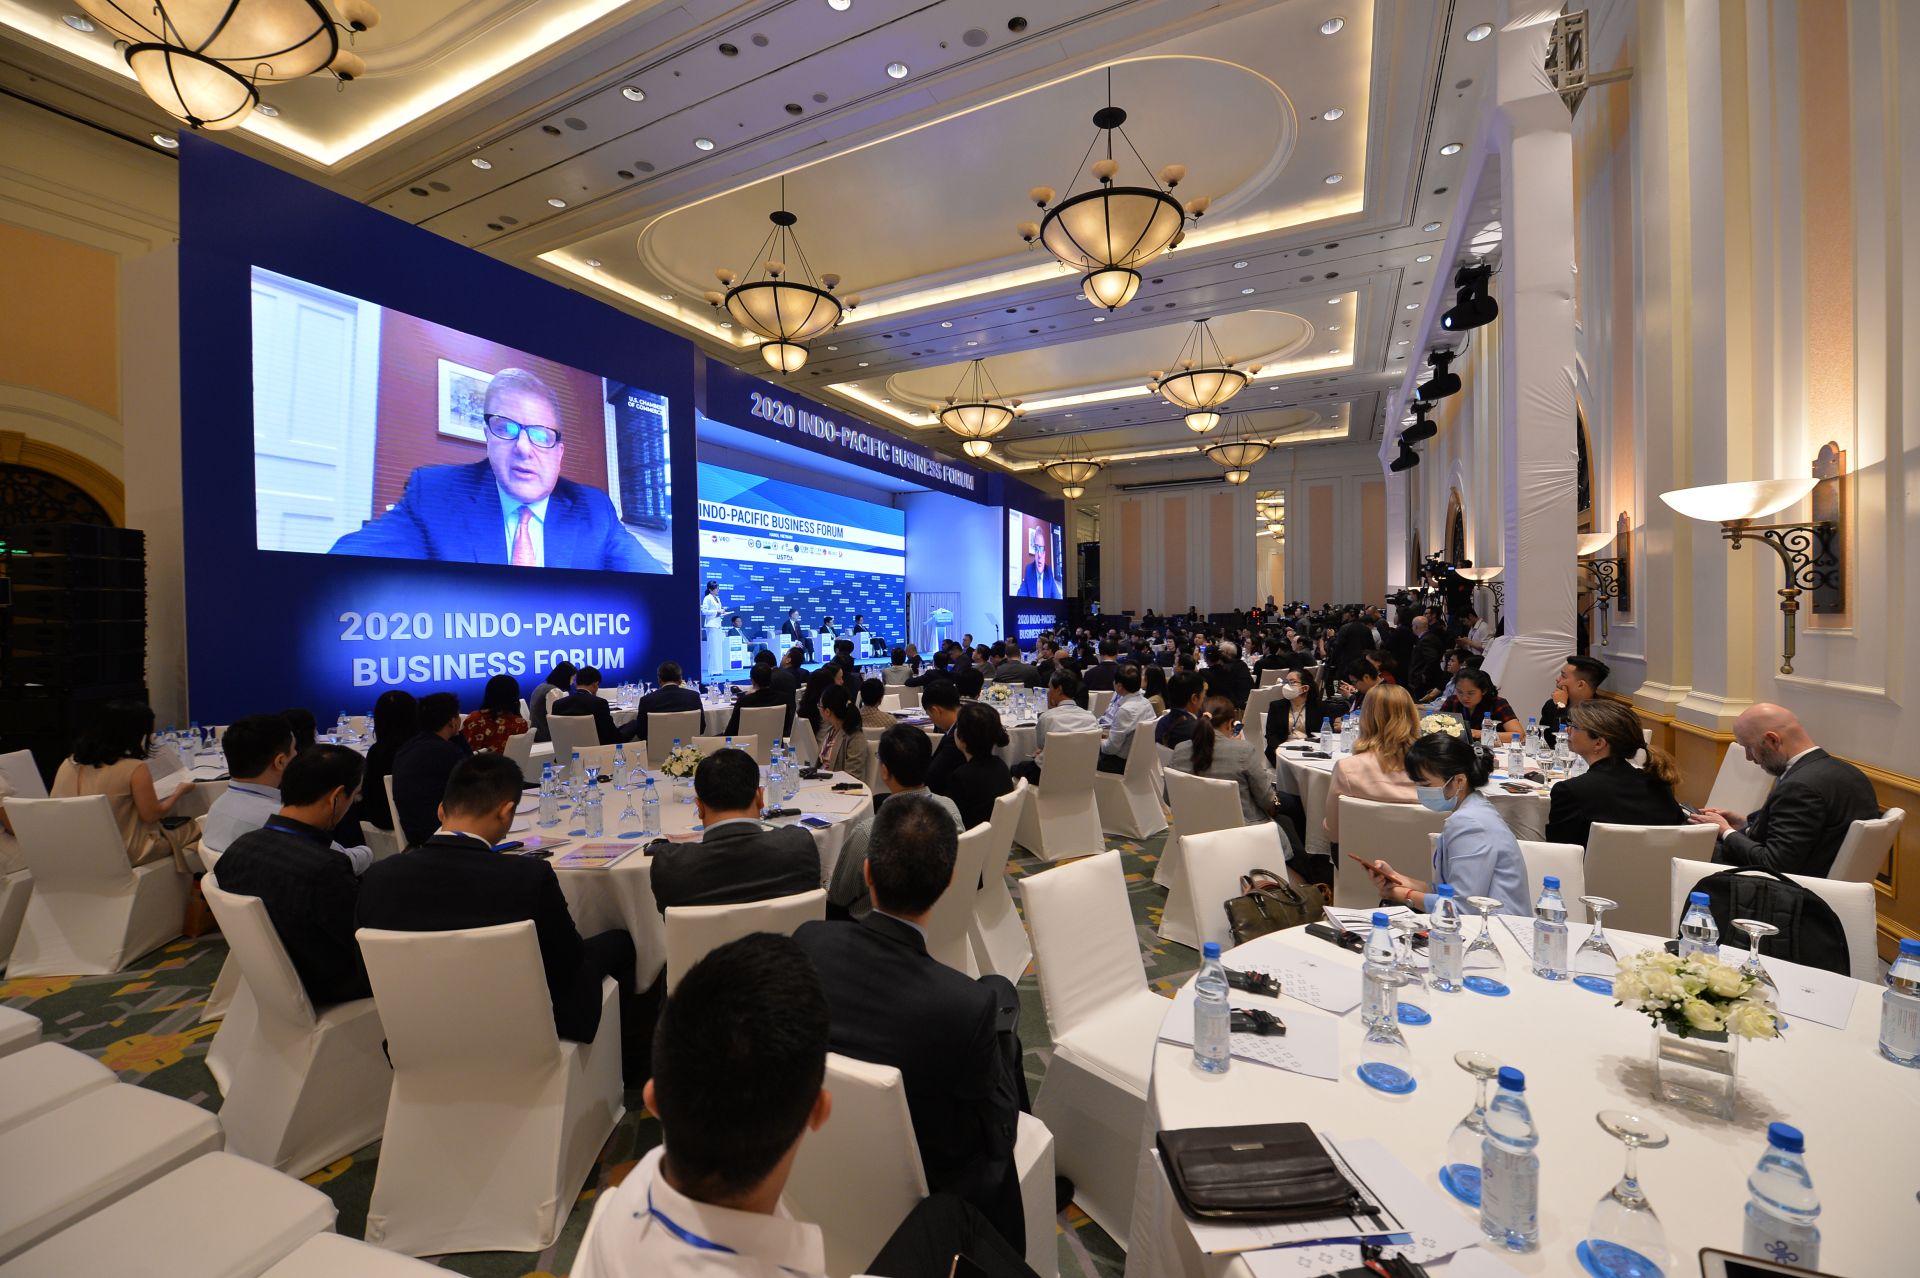 2020 INDO-PACIFIC BUSINESS FORUM